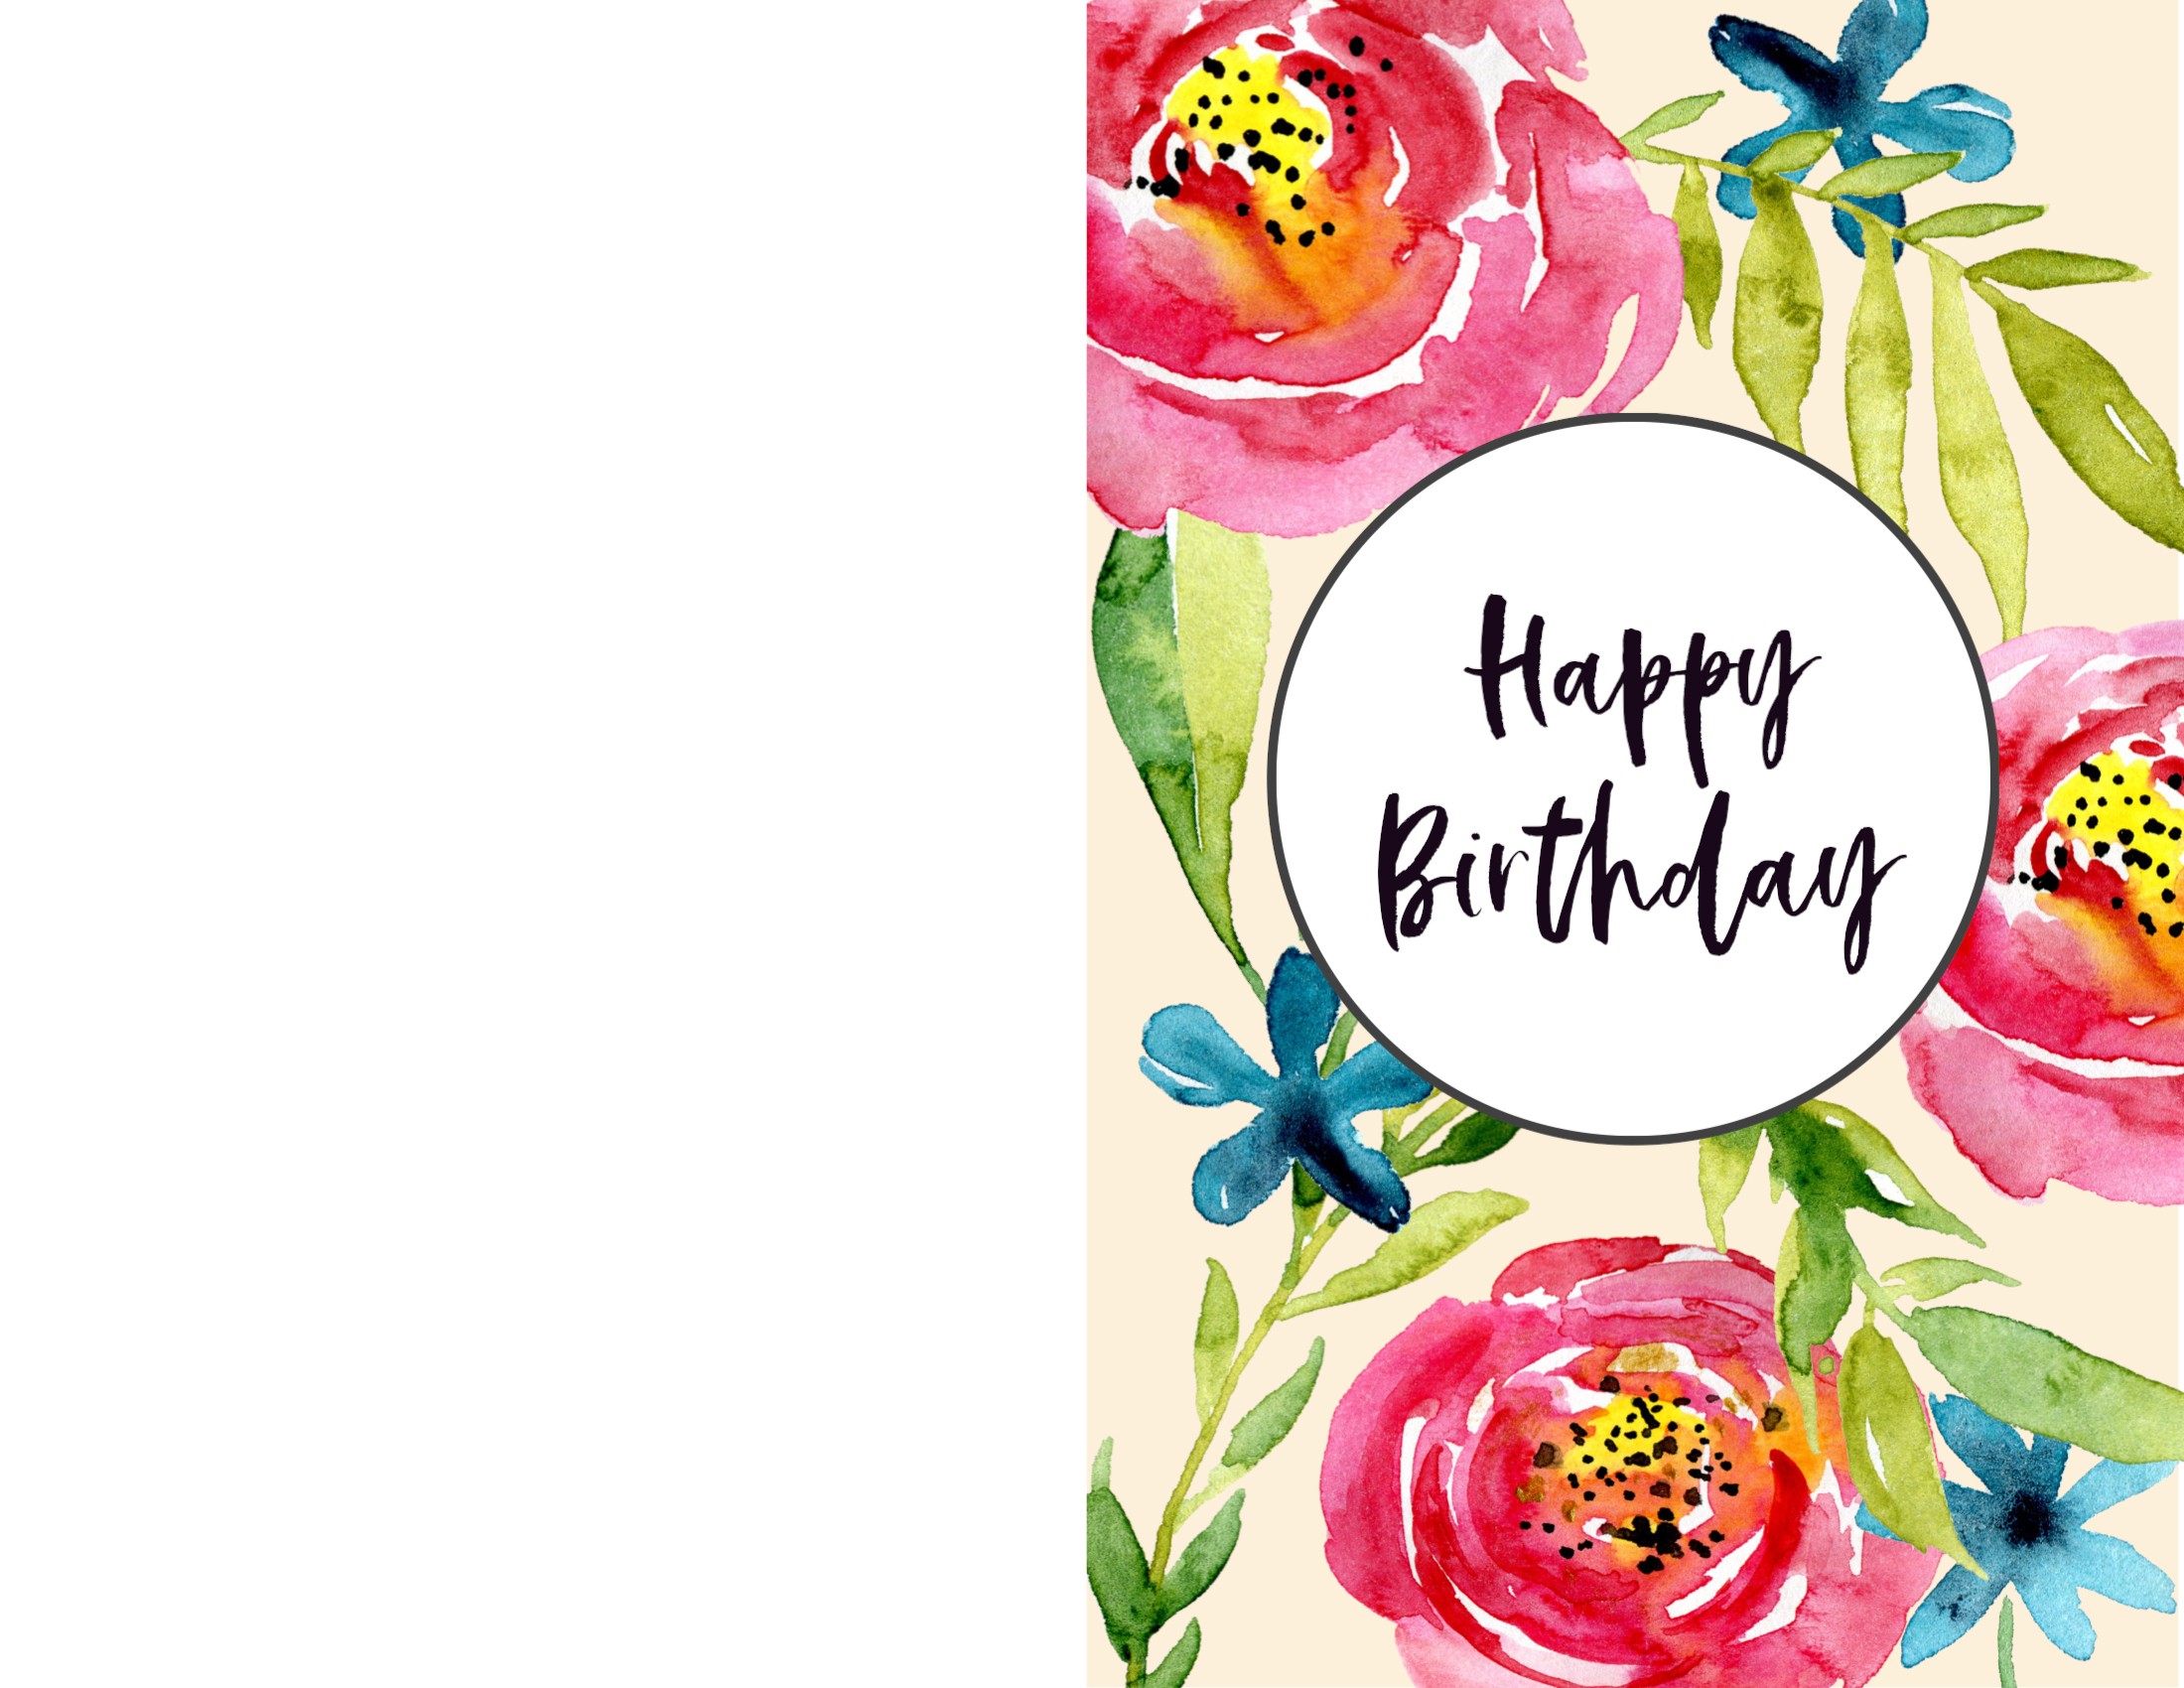 22-ideas-for-happy-birthday-cards-to-print-home-family-style-and